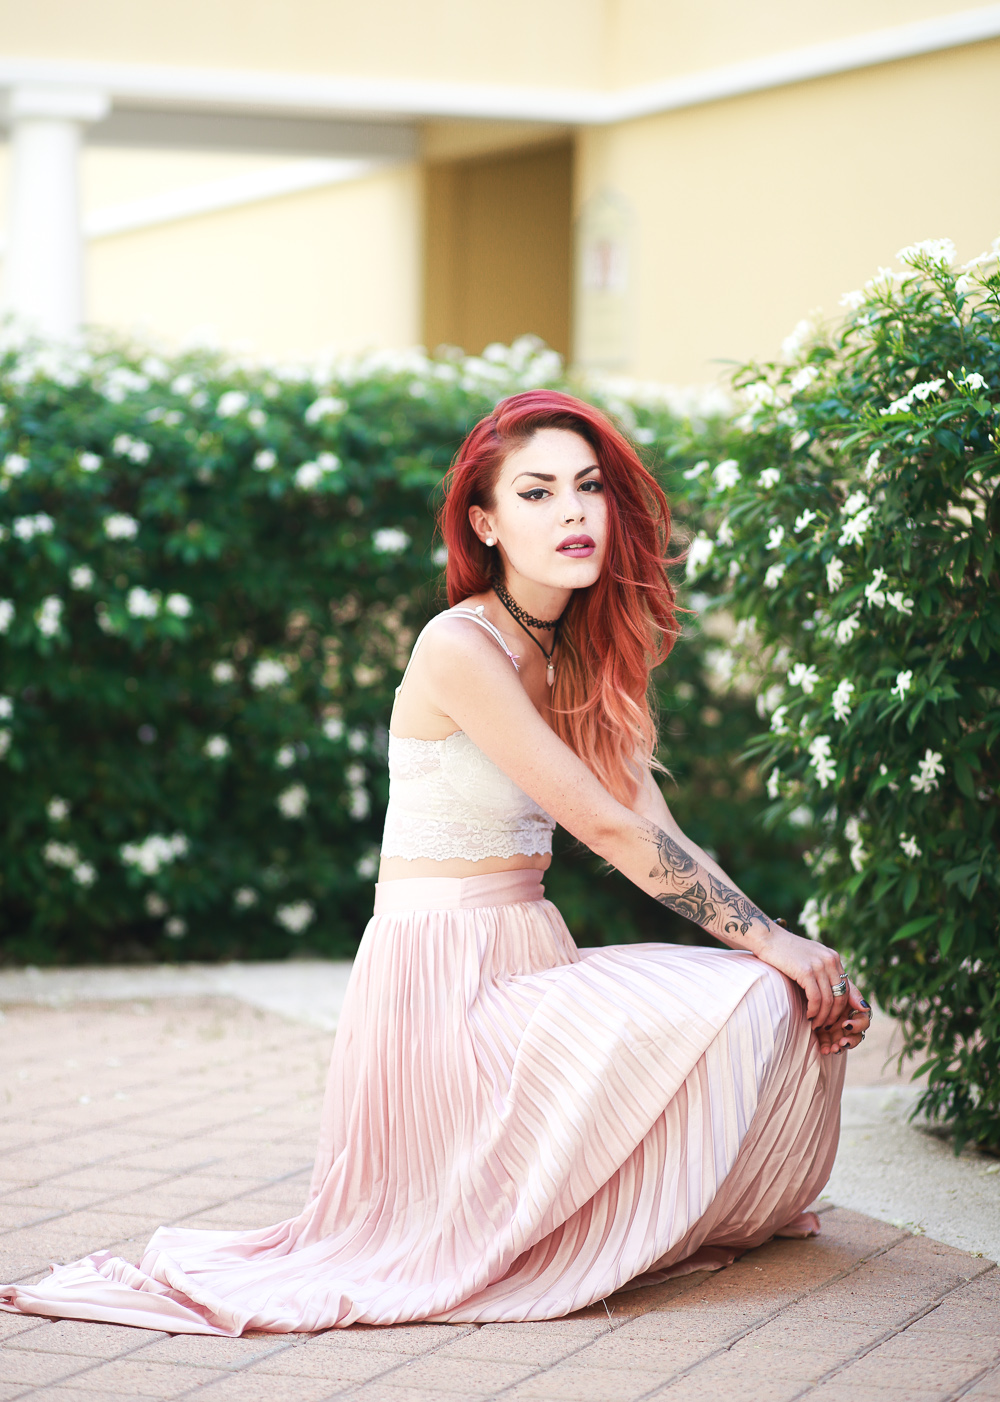 Le Happy wearing pastel pleated skirt and lace bustier